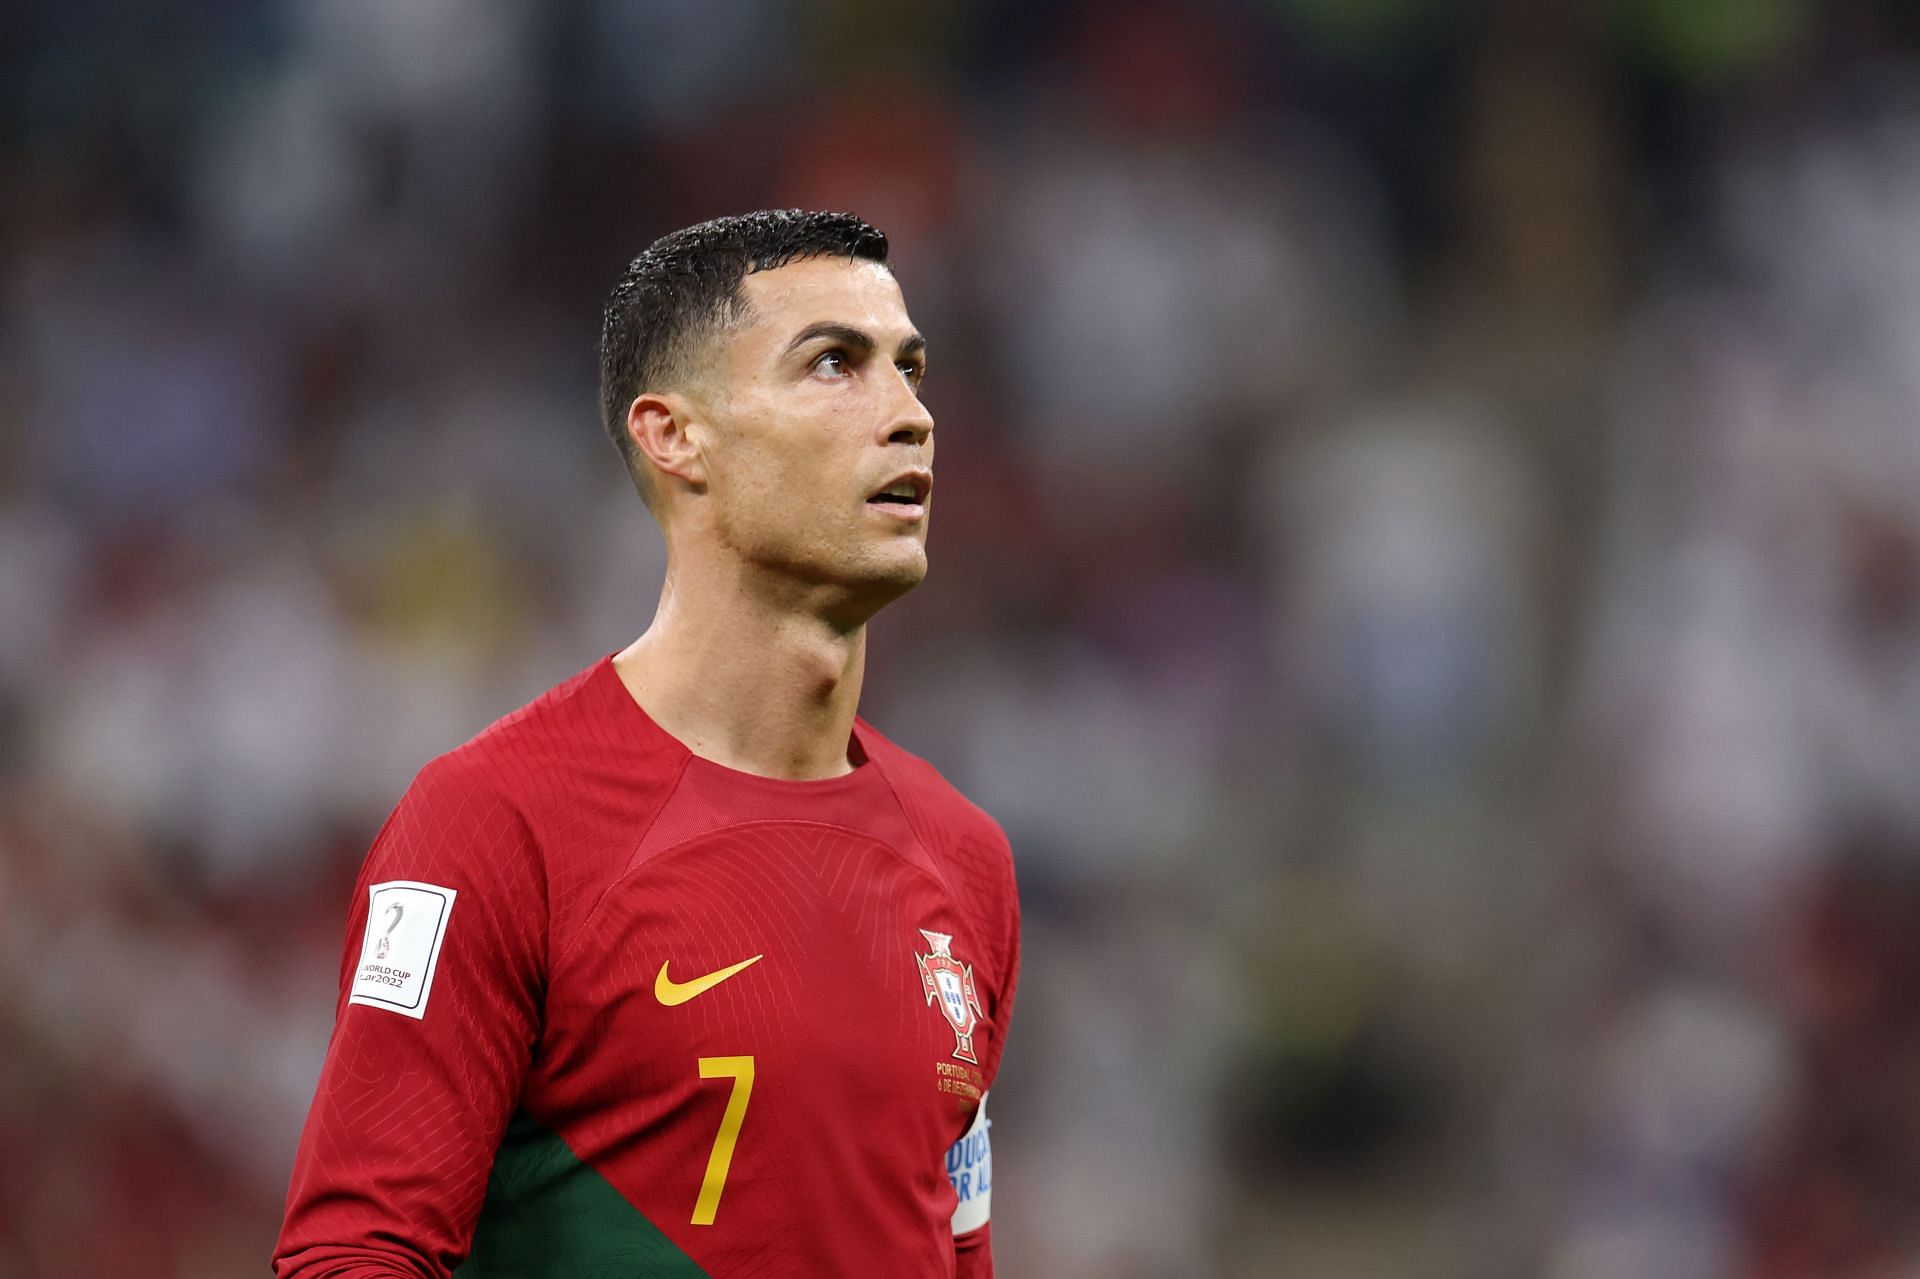 Ronaldo is enduring a difficult FIFA World Cup